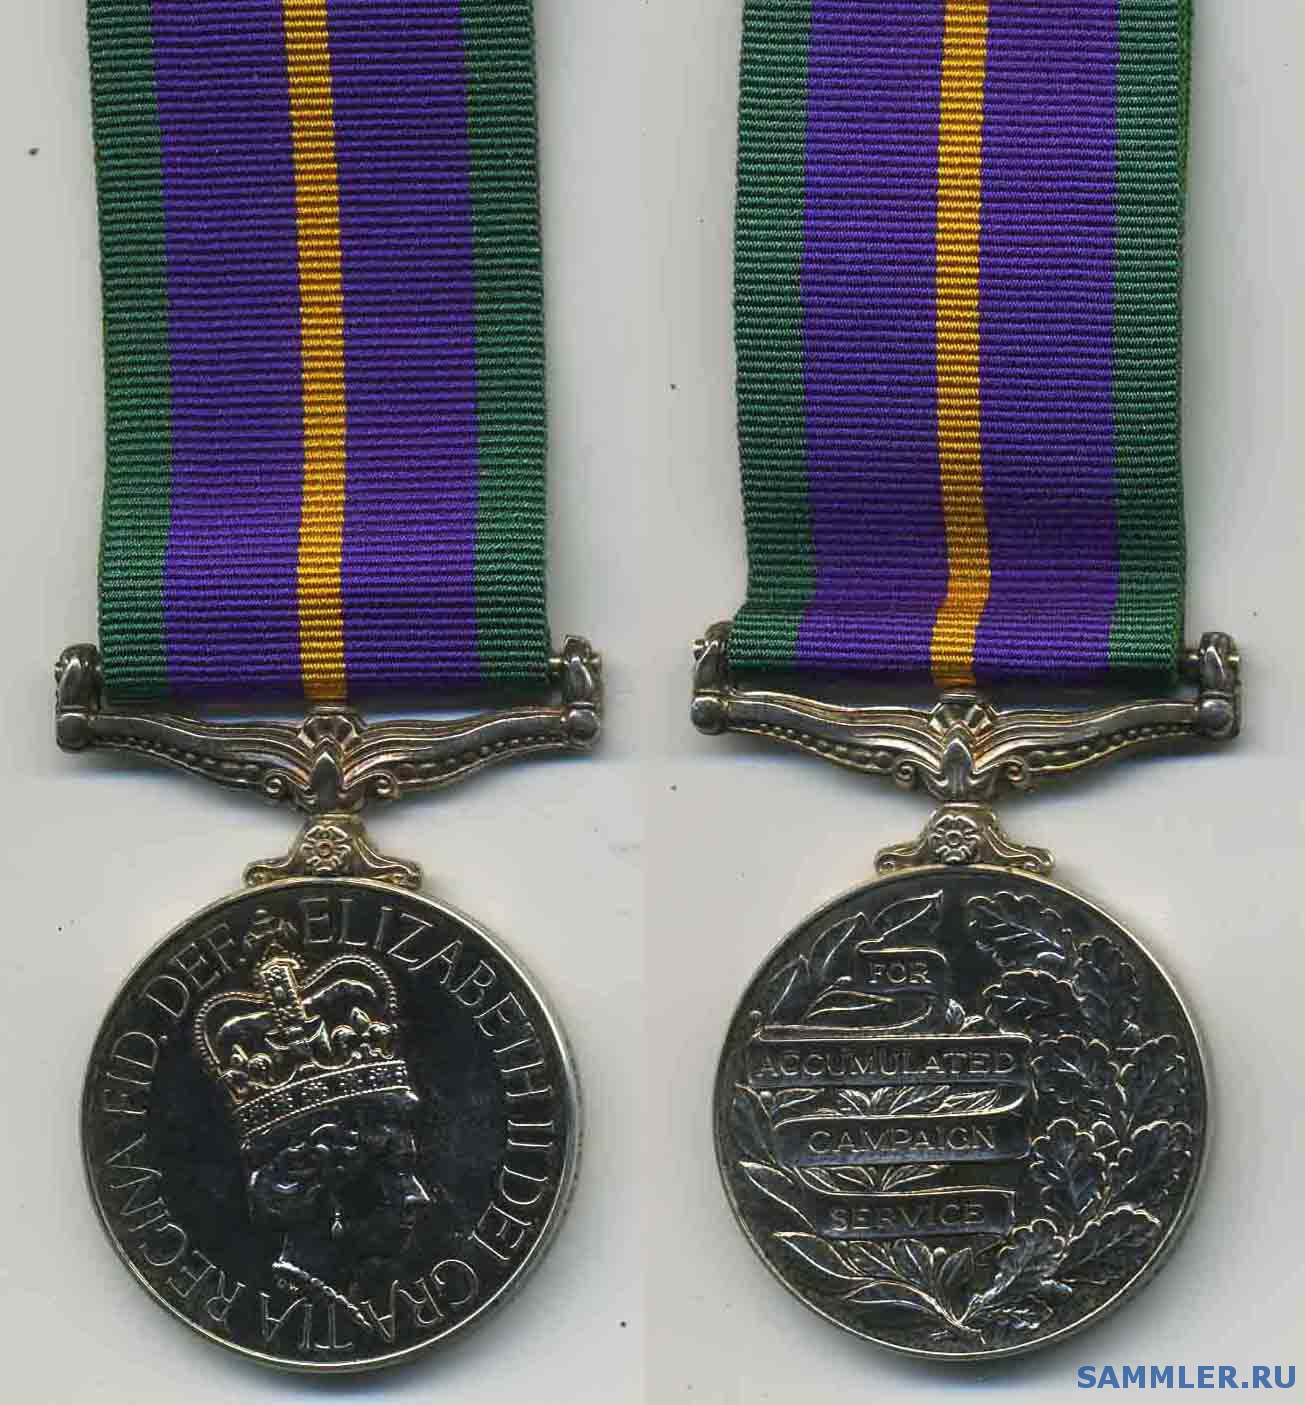 Accumulated_Campaign_Service_Medal.jpg